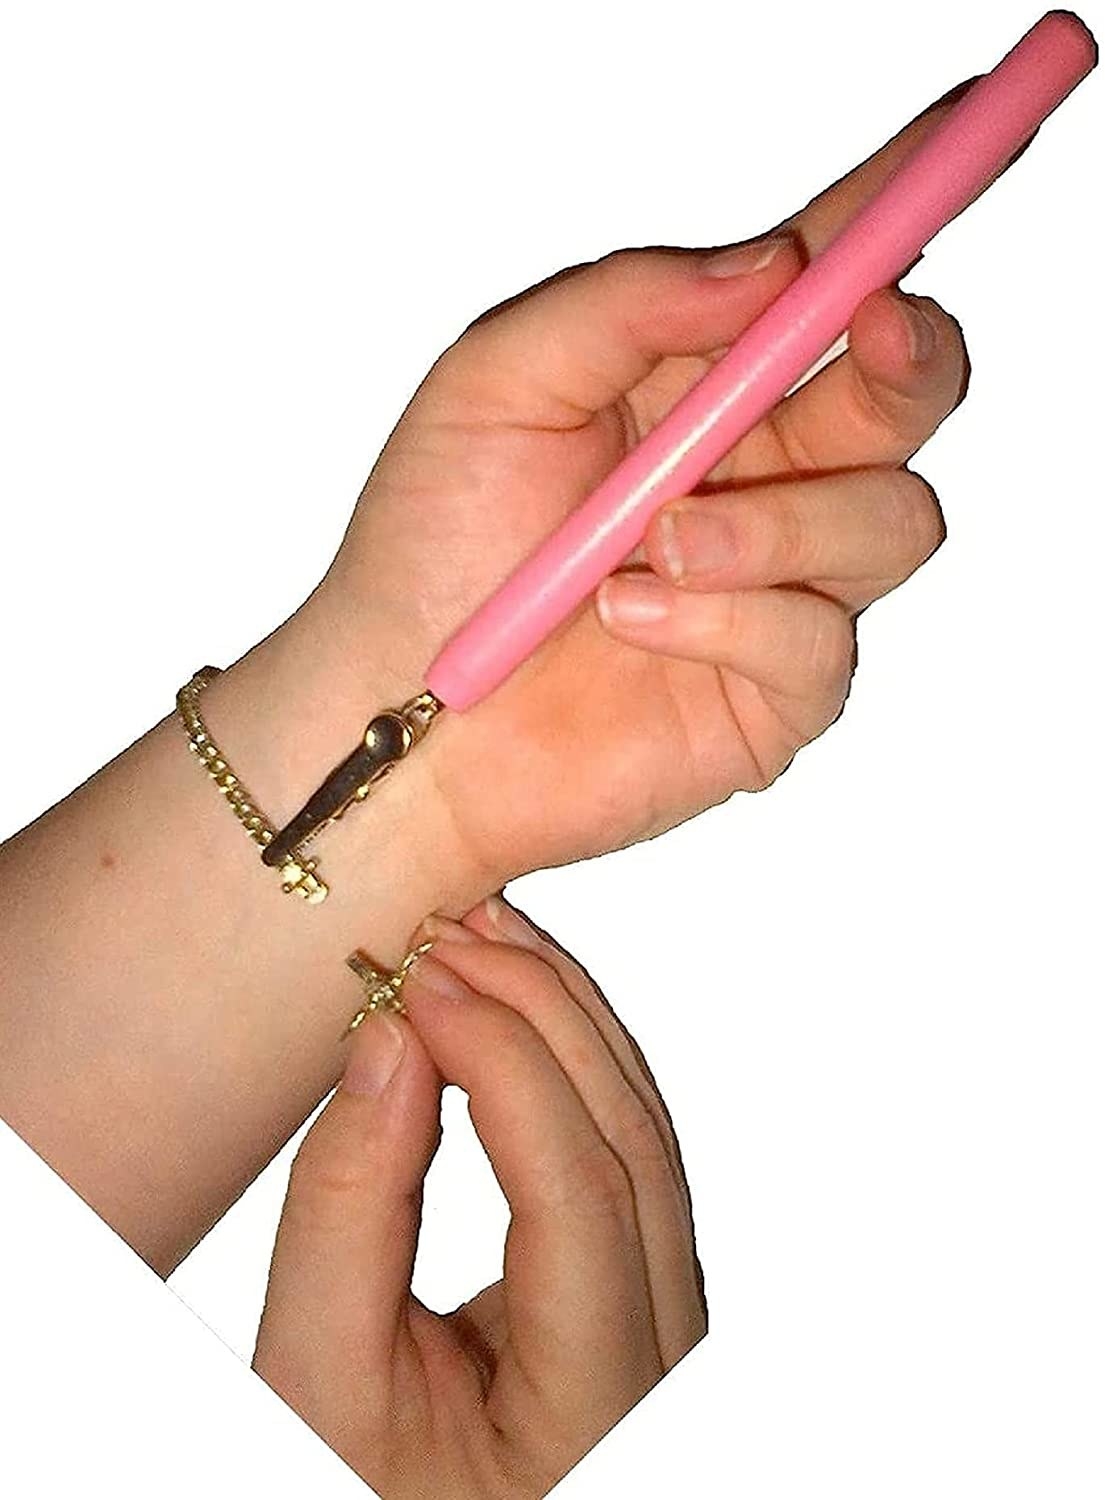 hands using the tool, a pink stick with clip on the end